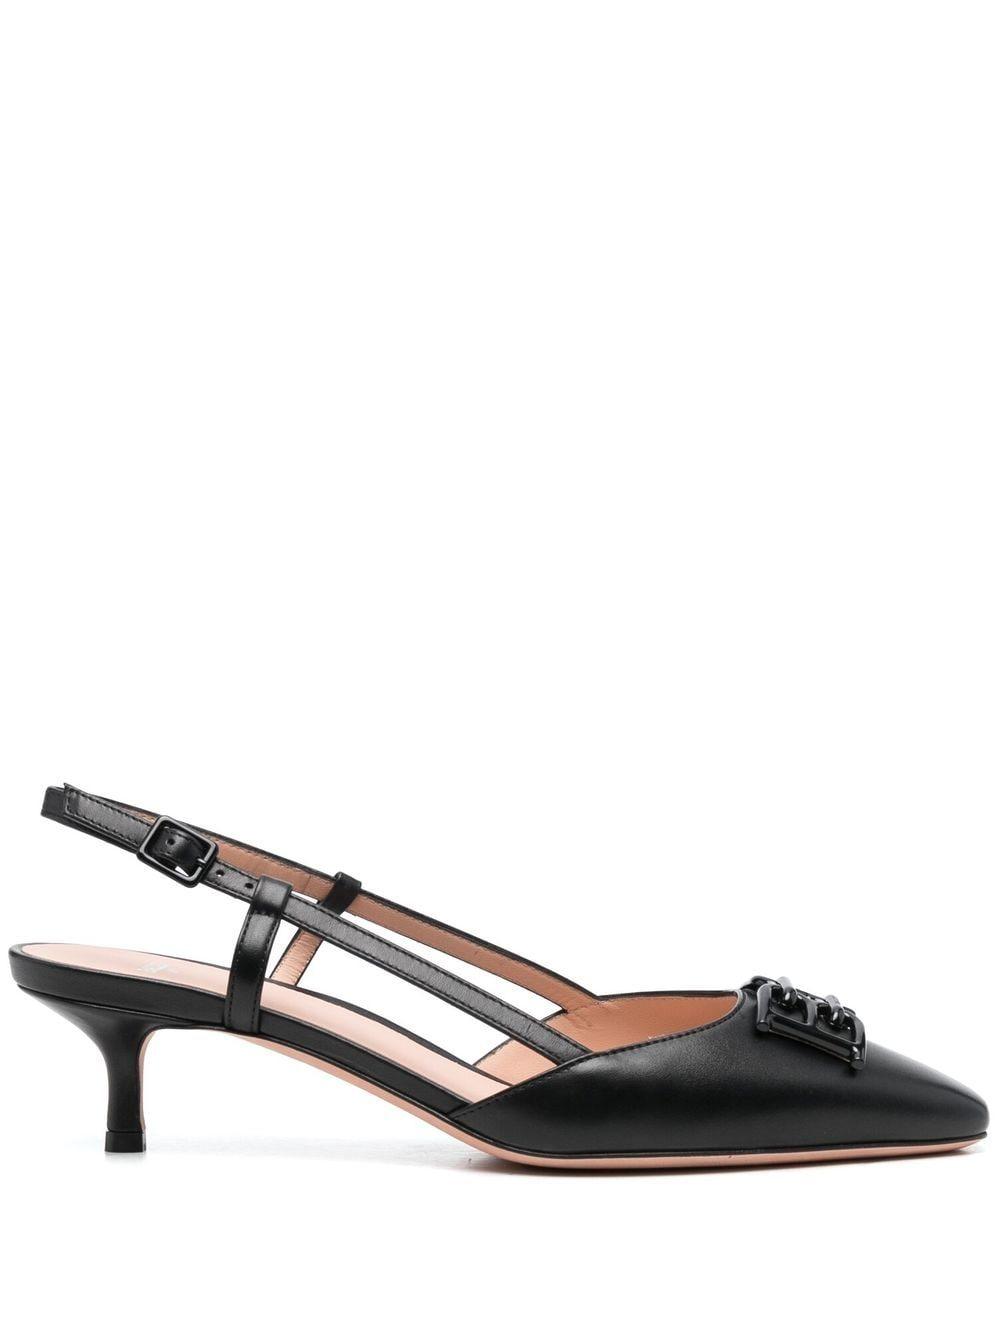 Bally Eva 50mm Leather Pumps in Black | Lyst